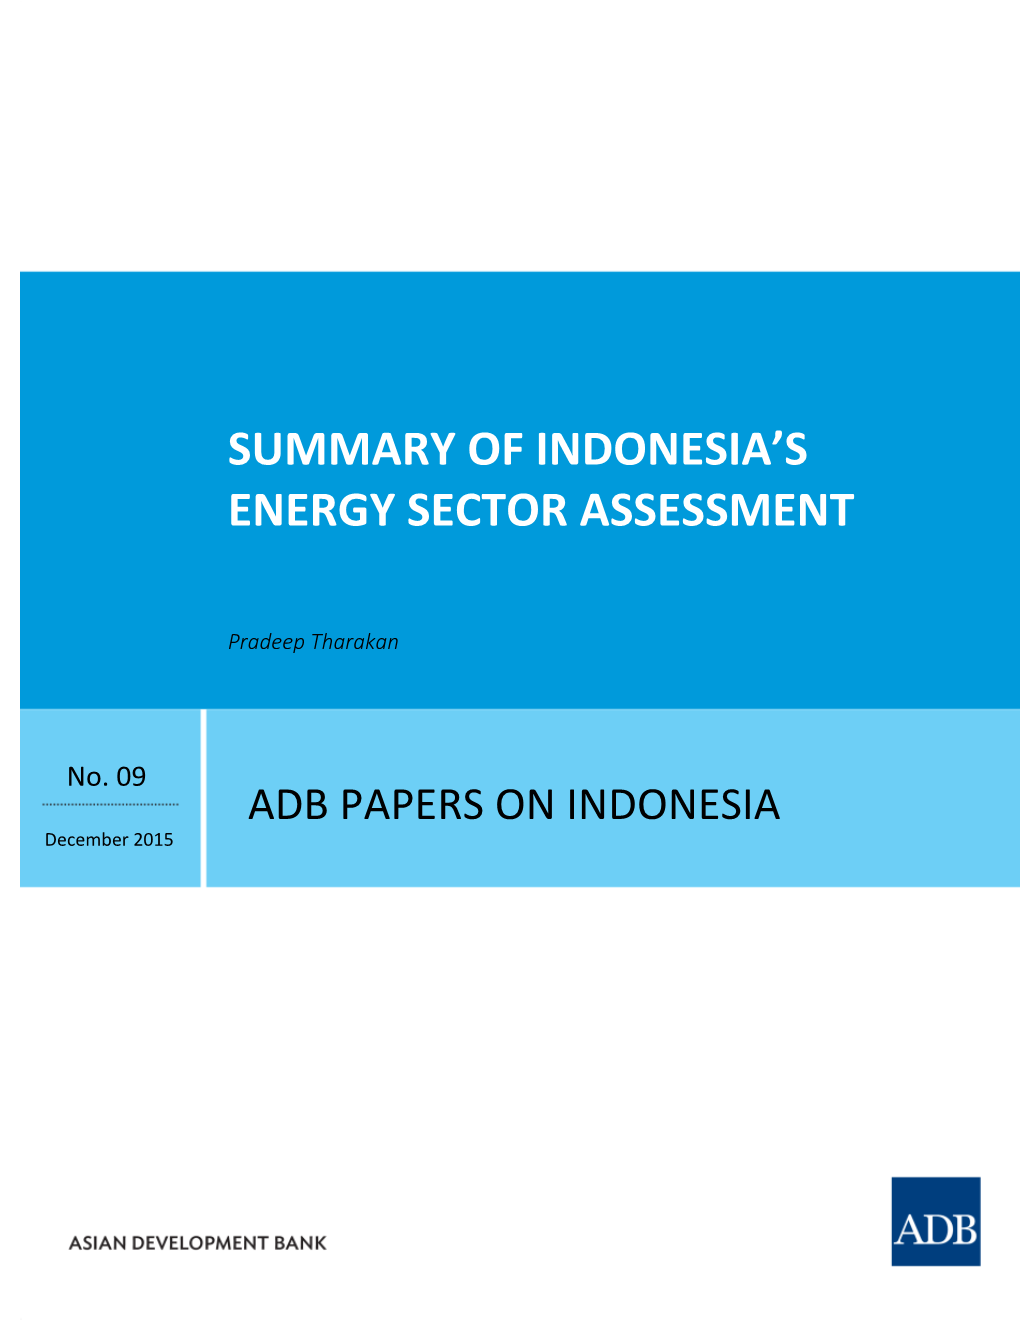 Summary of Indonesia's Energy Sector Assessment